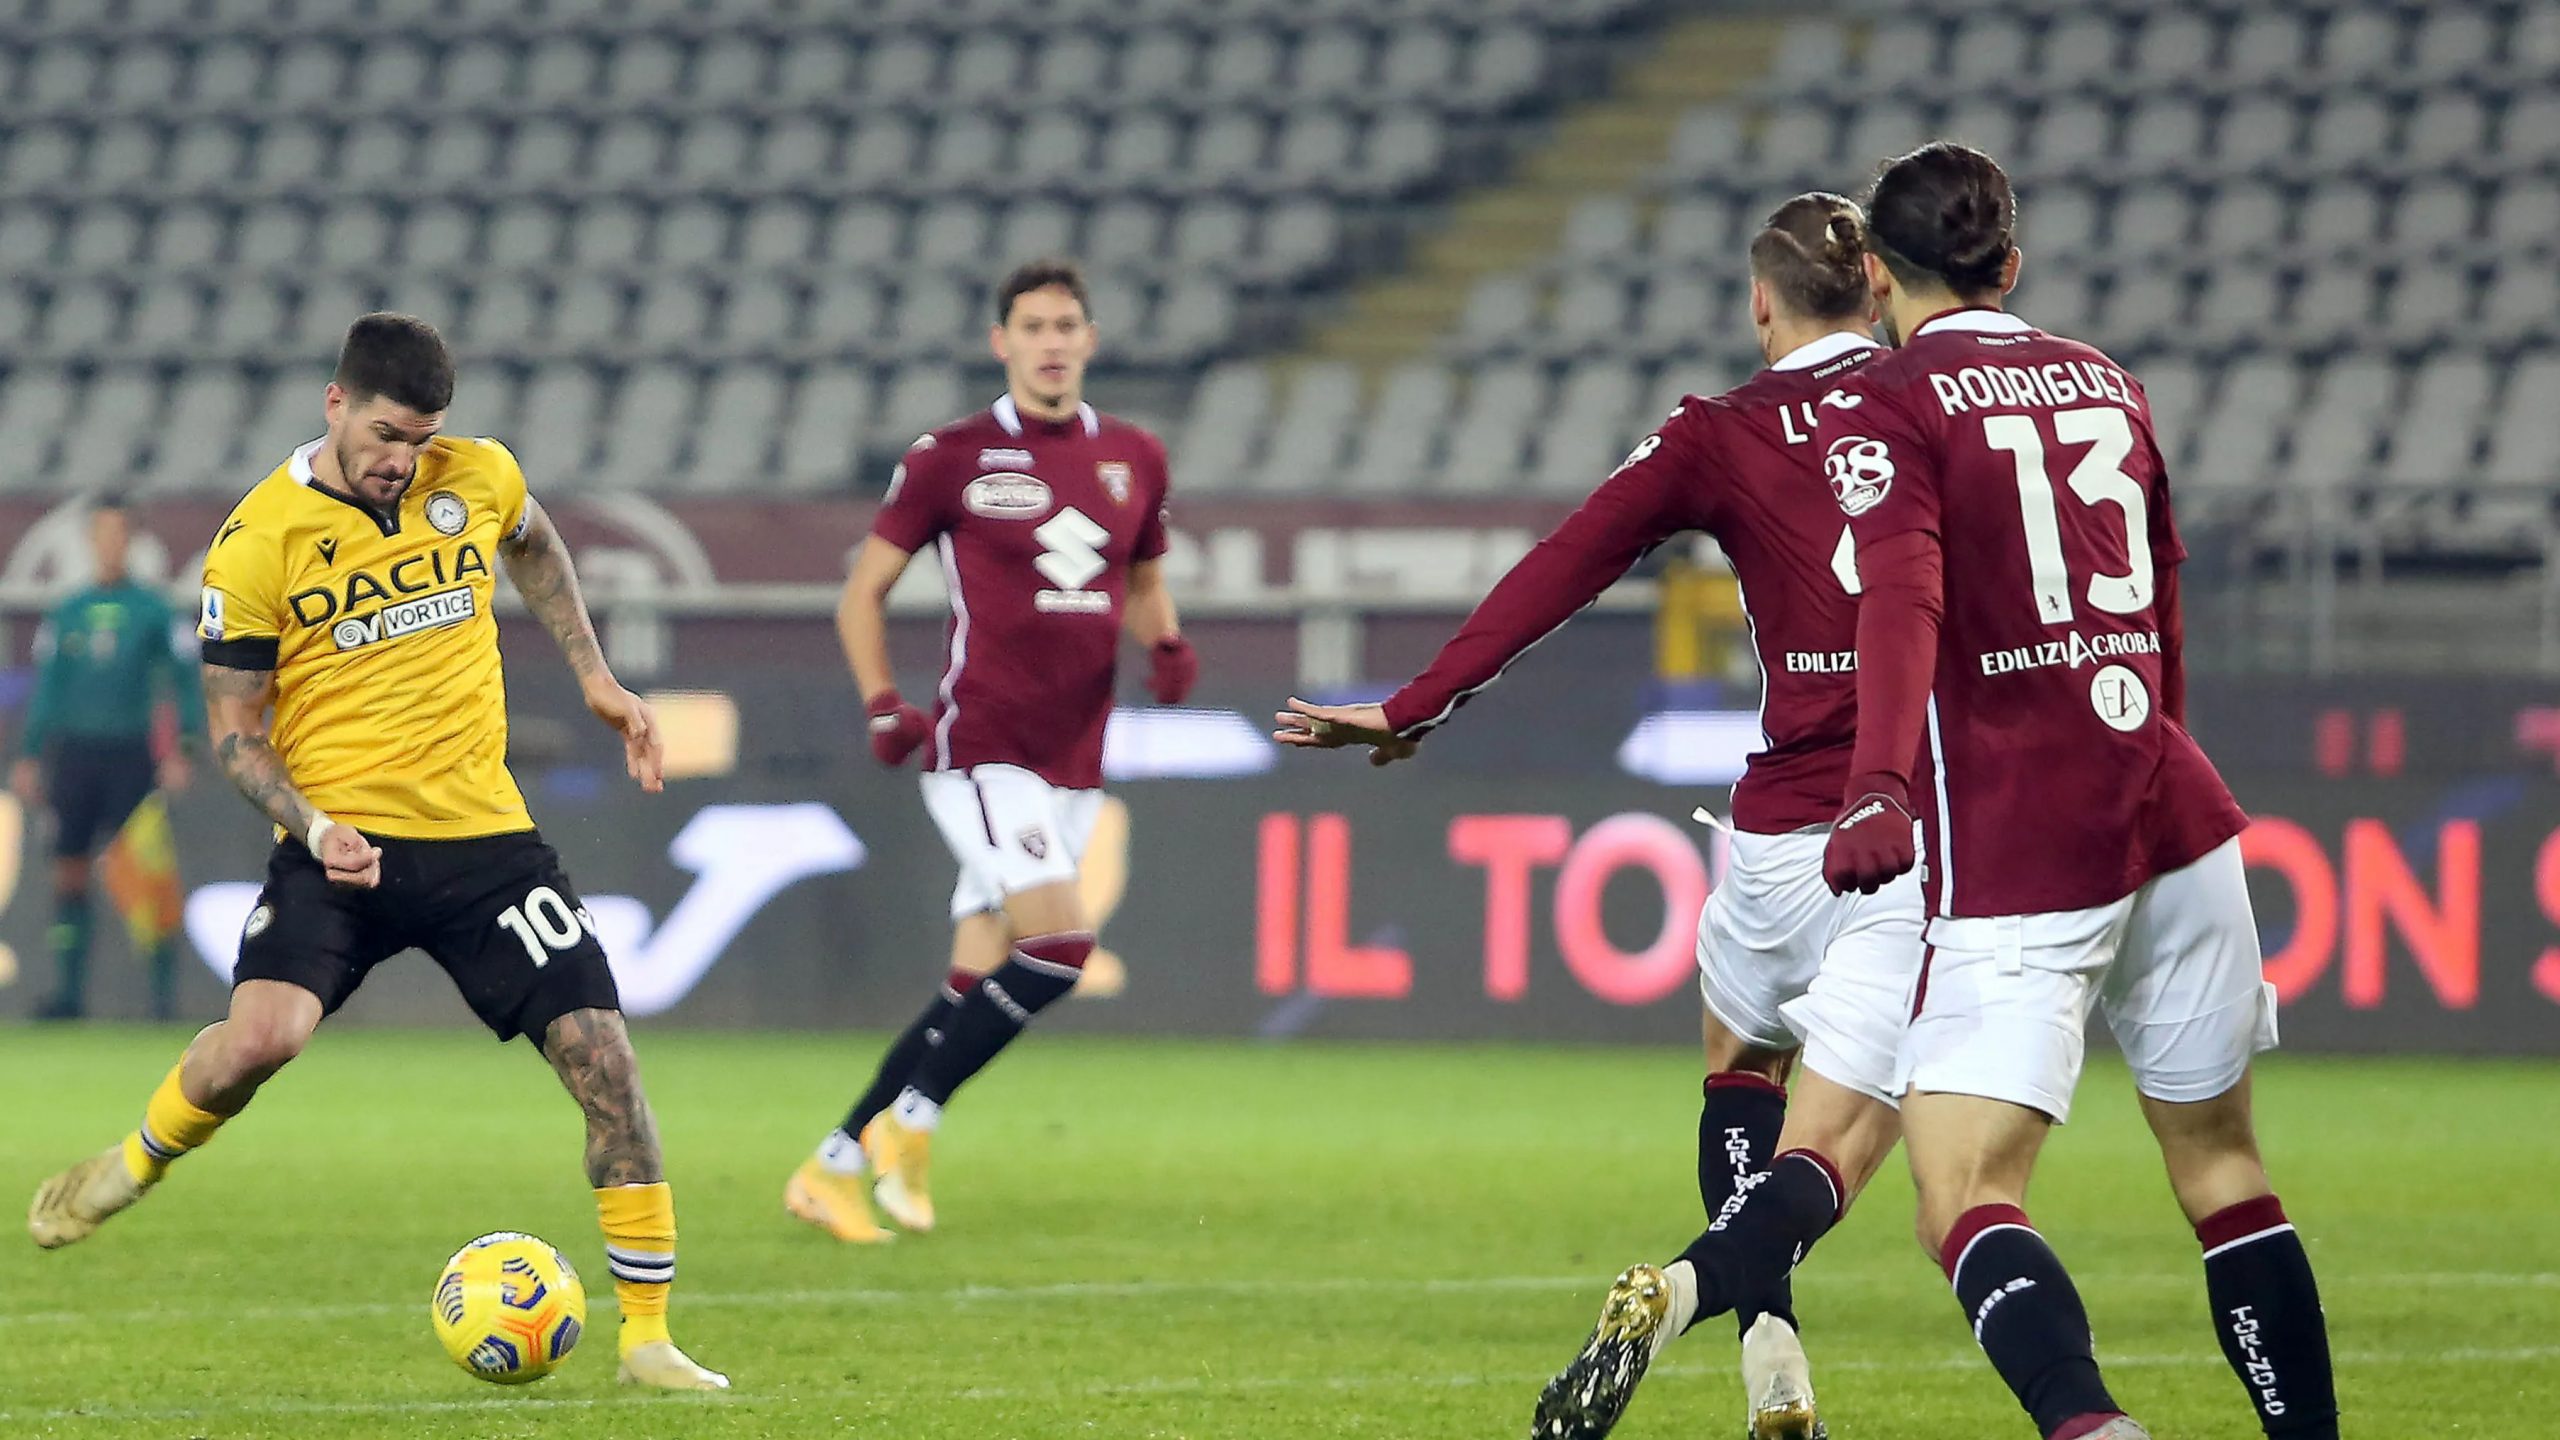 Torino hit 61-year-old low in Serie A but Andrea Belotti scores 100th goal